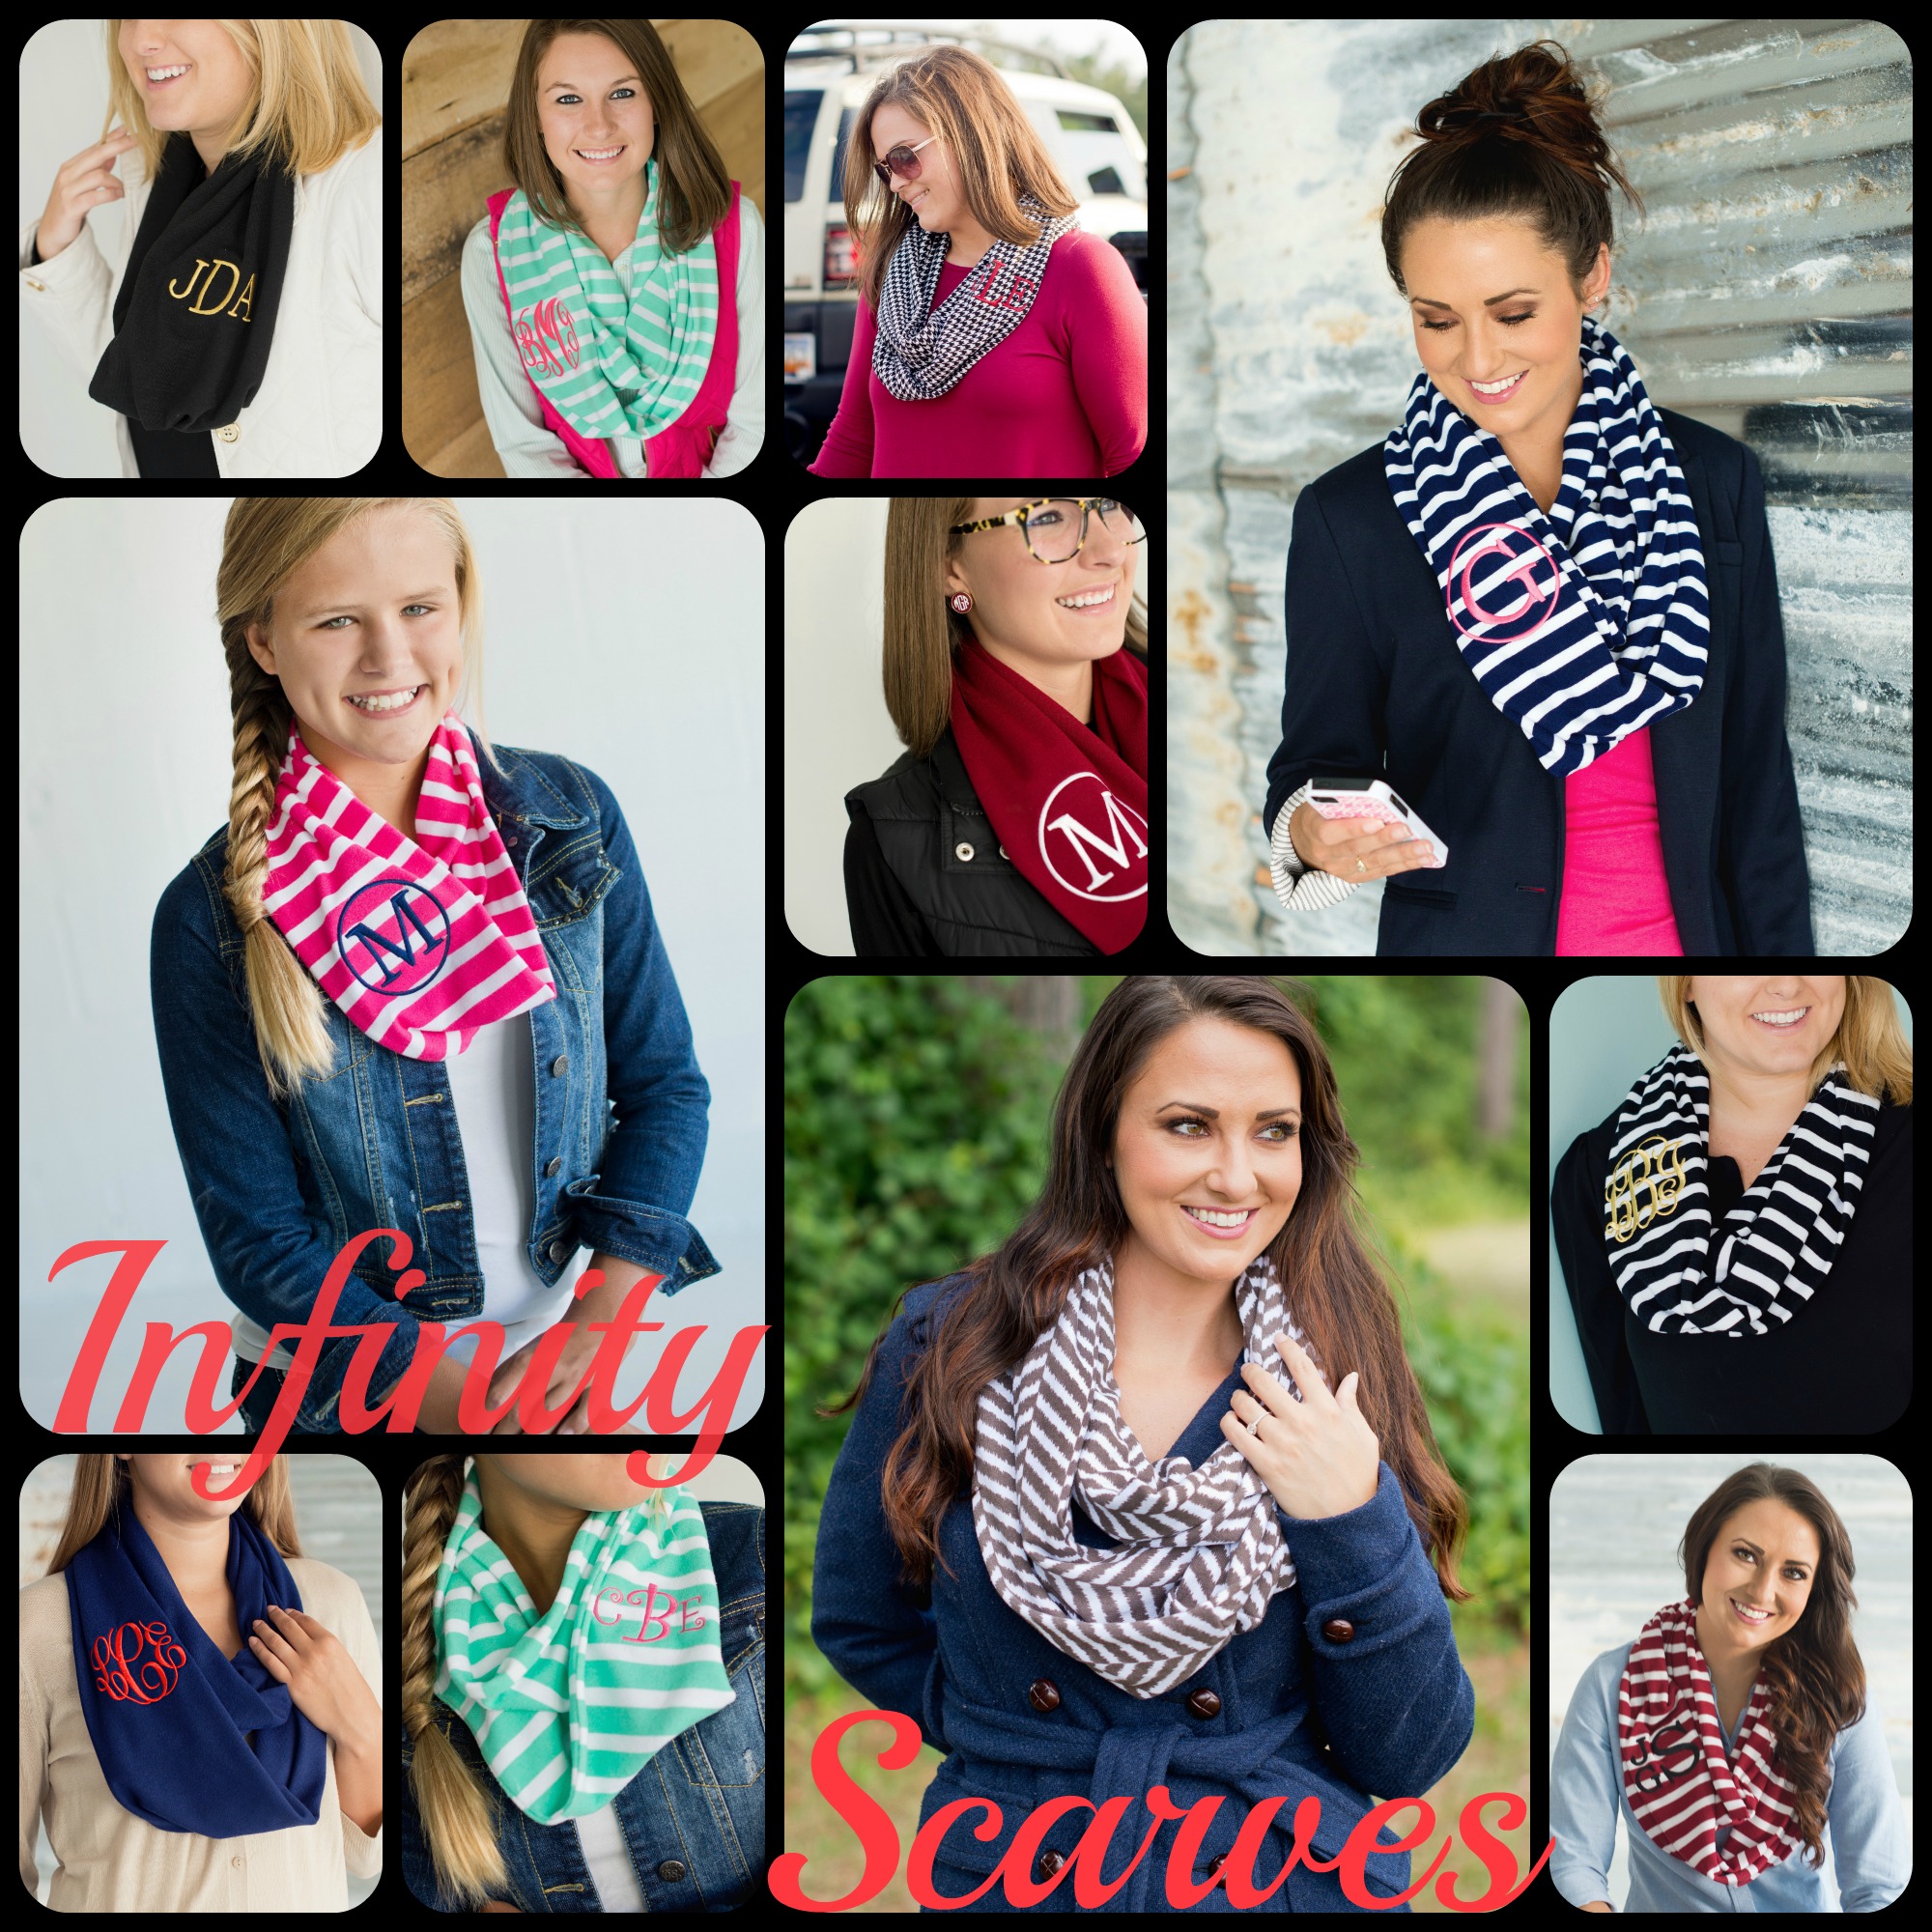 50% off all scarves, infinity scarves, personalized scarves, monogrammed scarves, matching scarves, solid scarf, striped scarf, houndstooth scarf, herringbone scarf